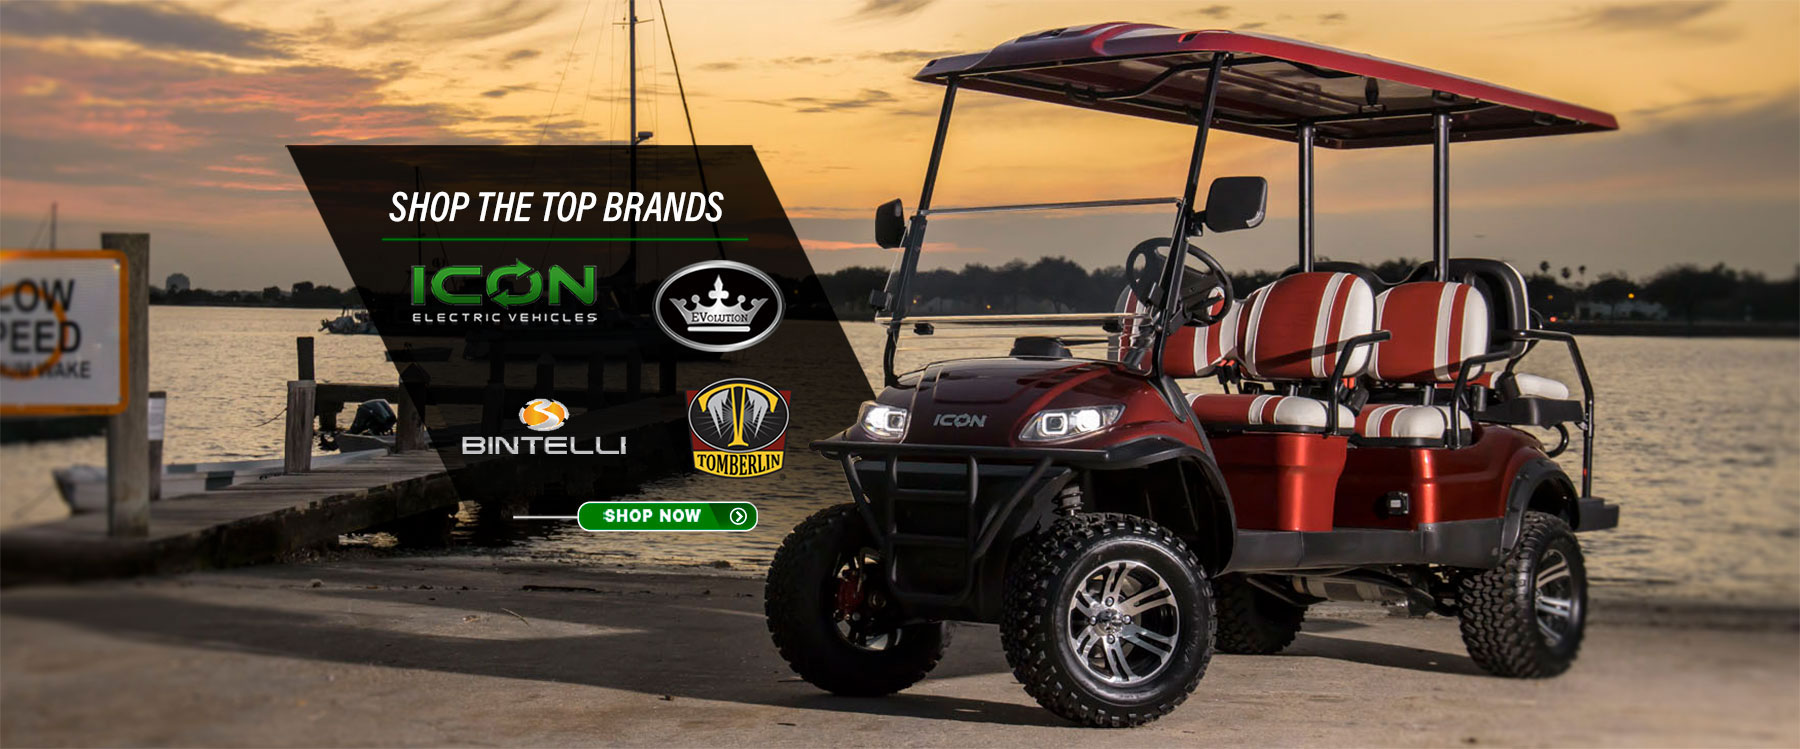 Home | Golf Cart Dealer | Service and Golf Carts for Sale in Clearwater, Tampa, Sarasota FL at ...